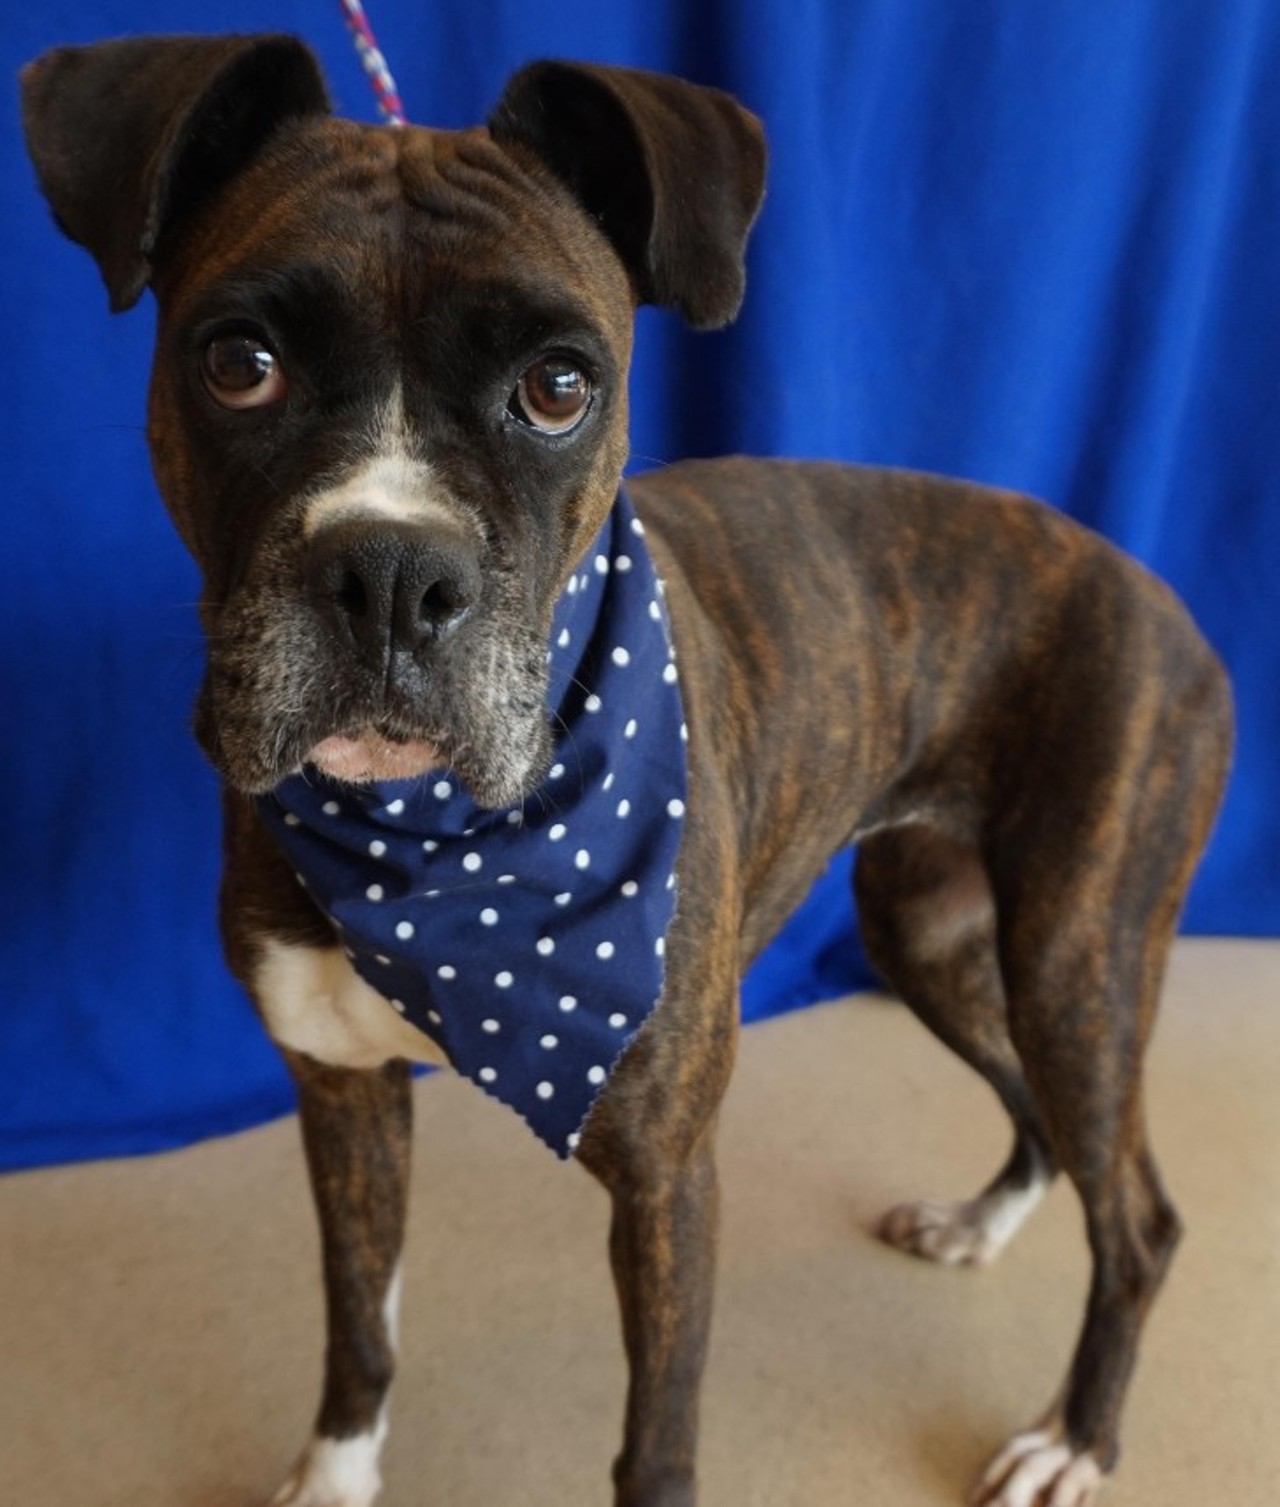 NAME: Layla 
GENDER: Female 
BREED: Boxer
AGE: 5 years
WEIGHT: 41 pounds
SPECIAL CONSIDERATIONS: Layla (mother) and Ali (son) are a &#147;bonded pair&#148;, meaning they must be adopted together.
REASON I CAME TO MHS: Owner surrender
LOCATION: Rochester Hills Center for Animal Care
ID NUMBER: 872823